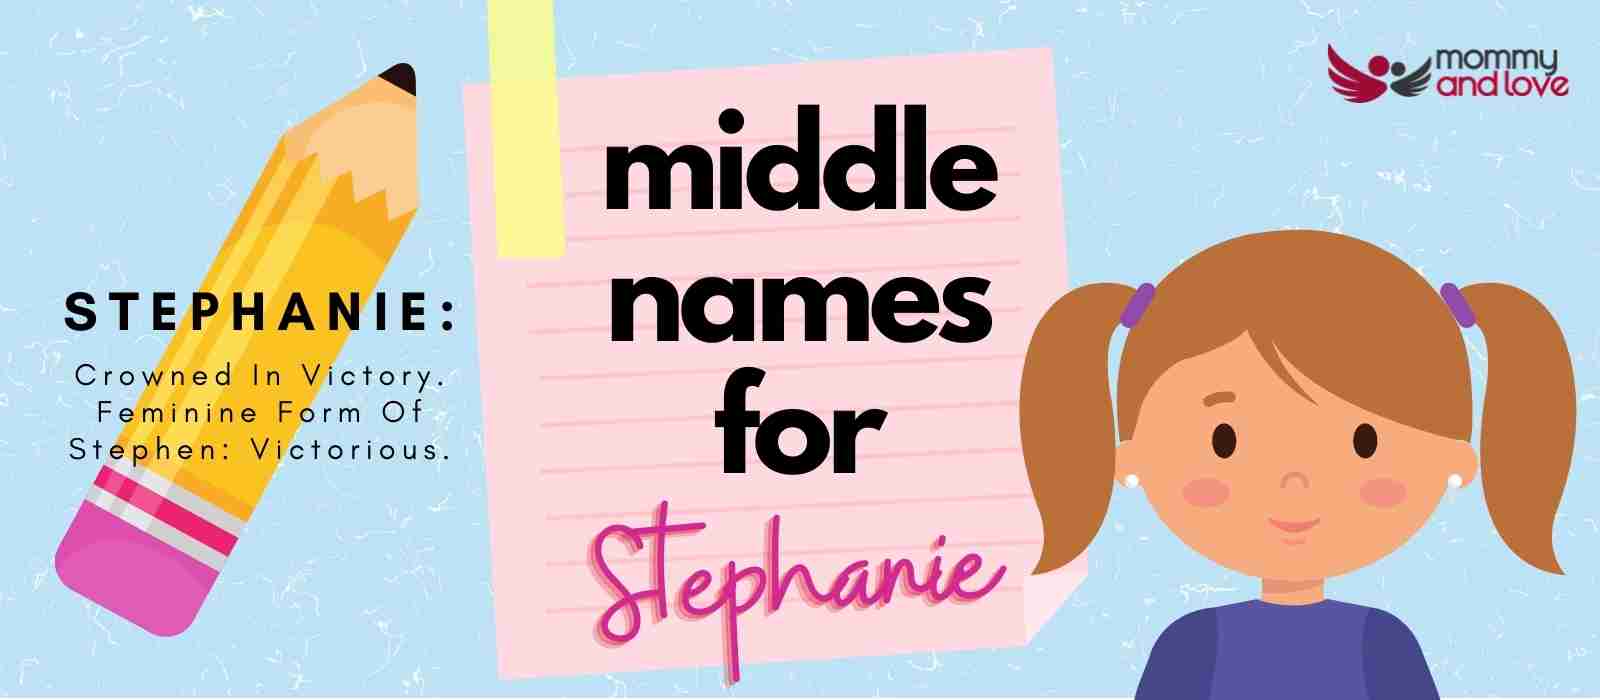 Middle Names for Stephanie